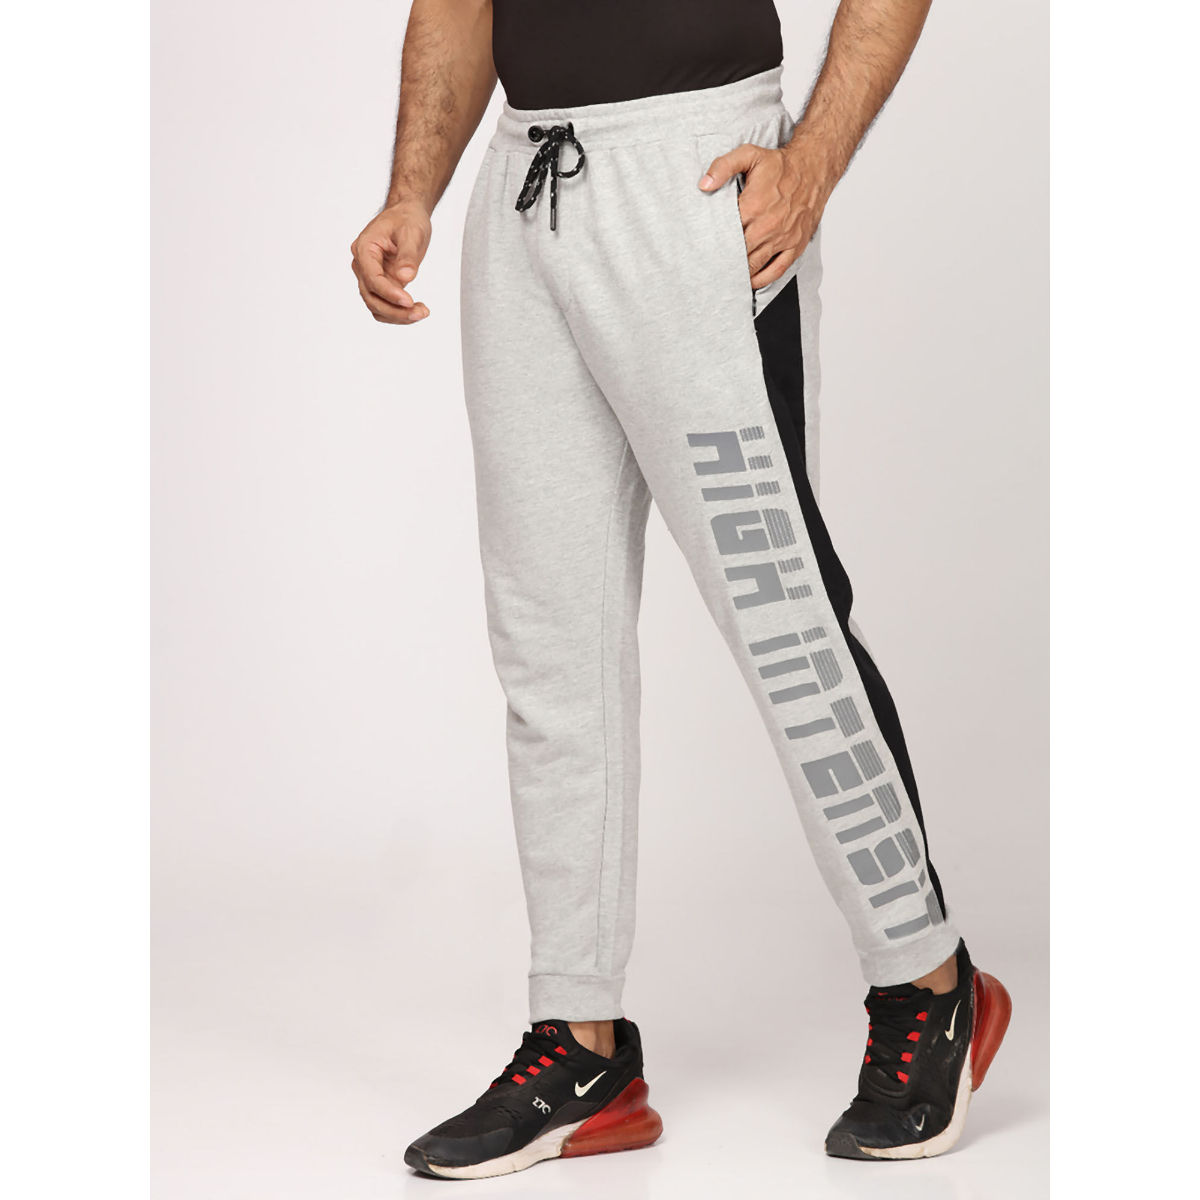 Buy Track Pants from top Brands at Best Prices Online in India | Tata CLiQ